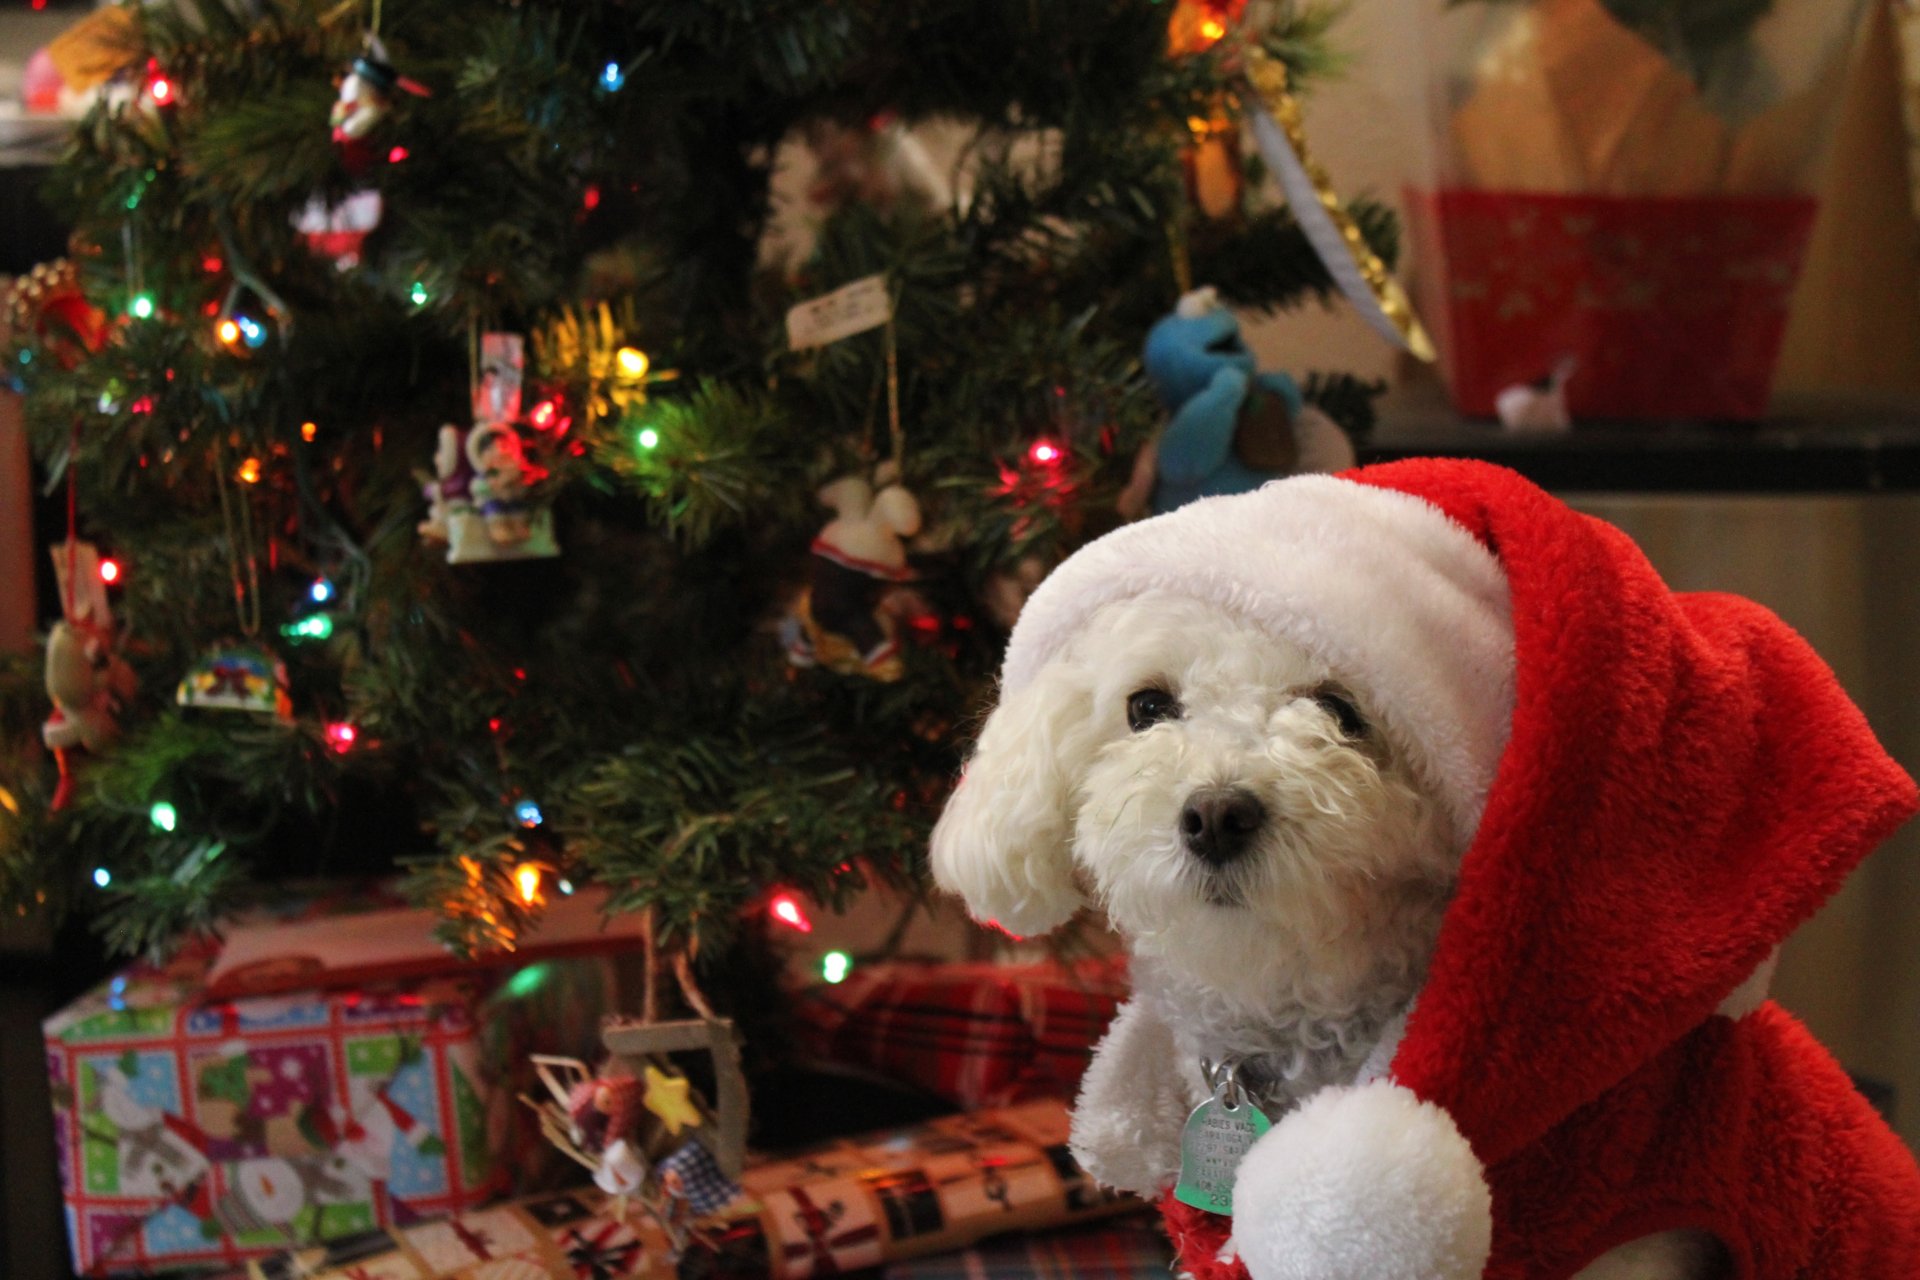 Pet present safety at Christmas